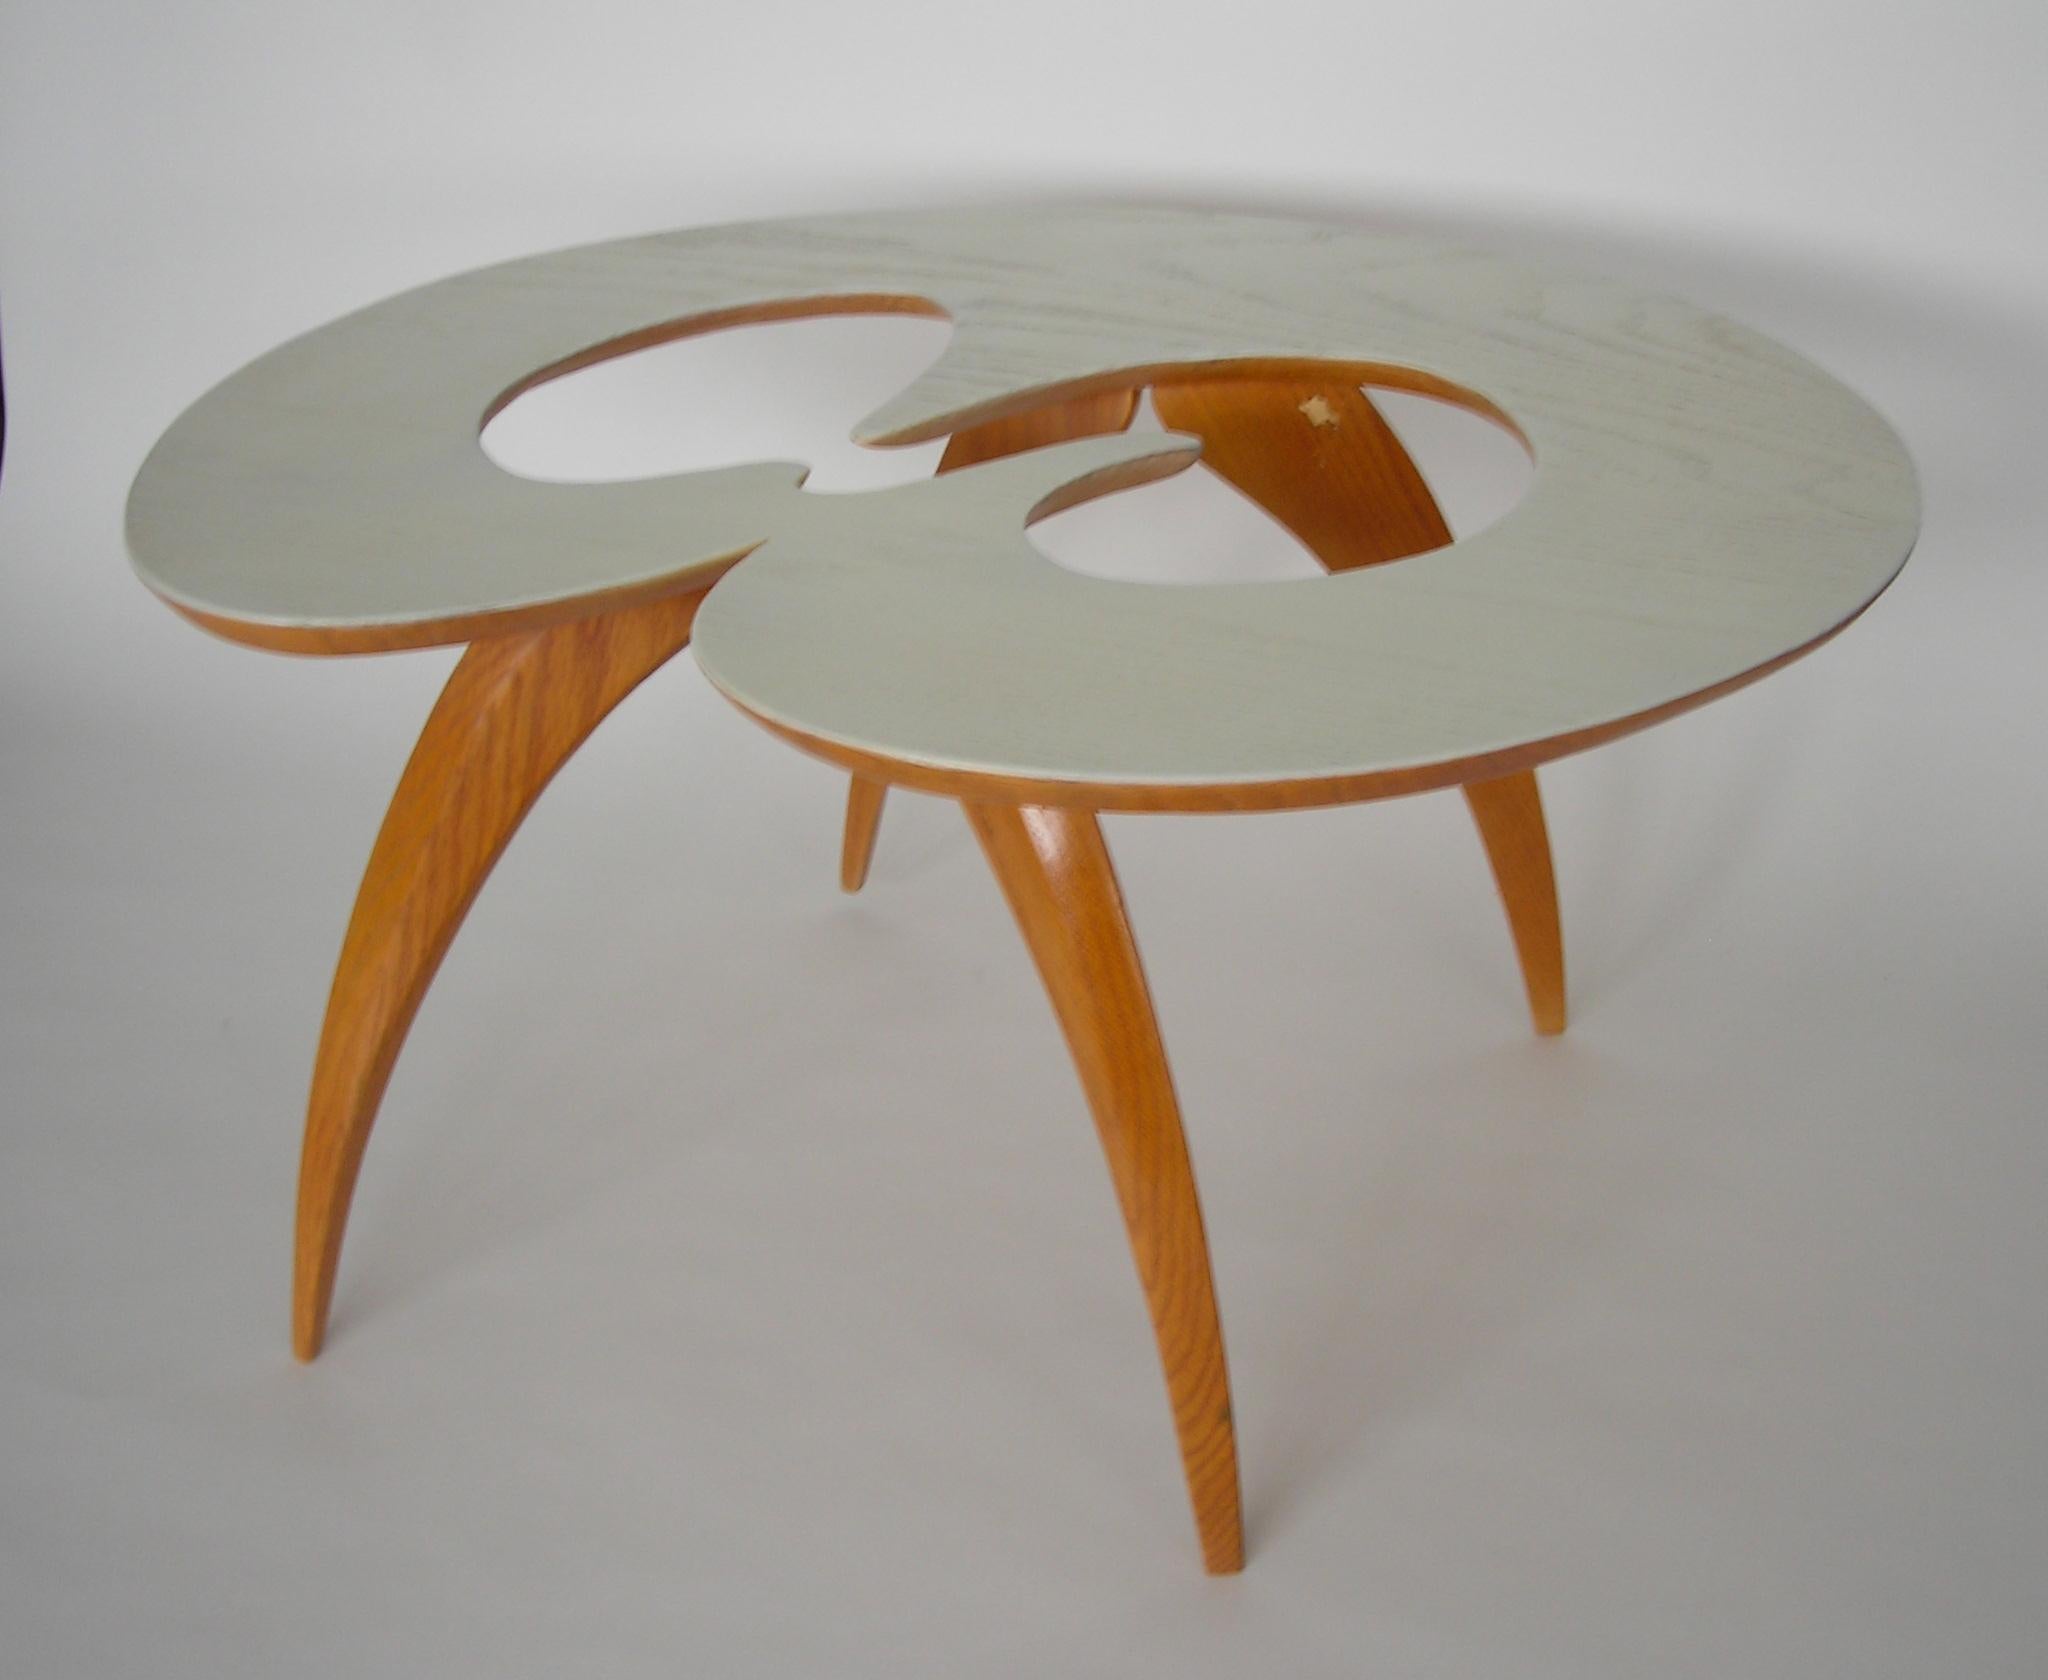 Alejandro Dron Abstract Sculpture - "Mitosis" Hand Made Sculptural Table